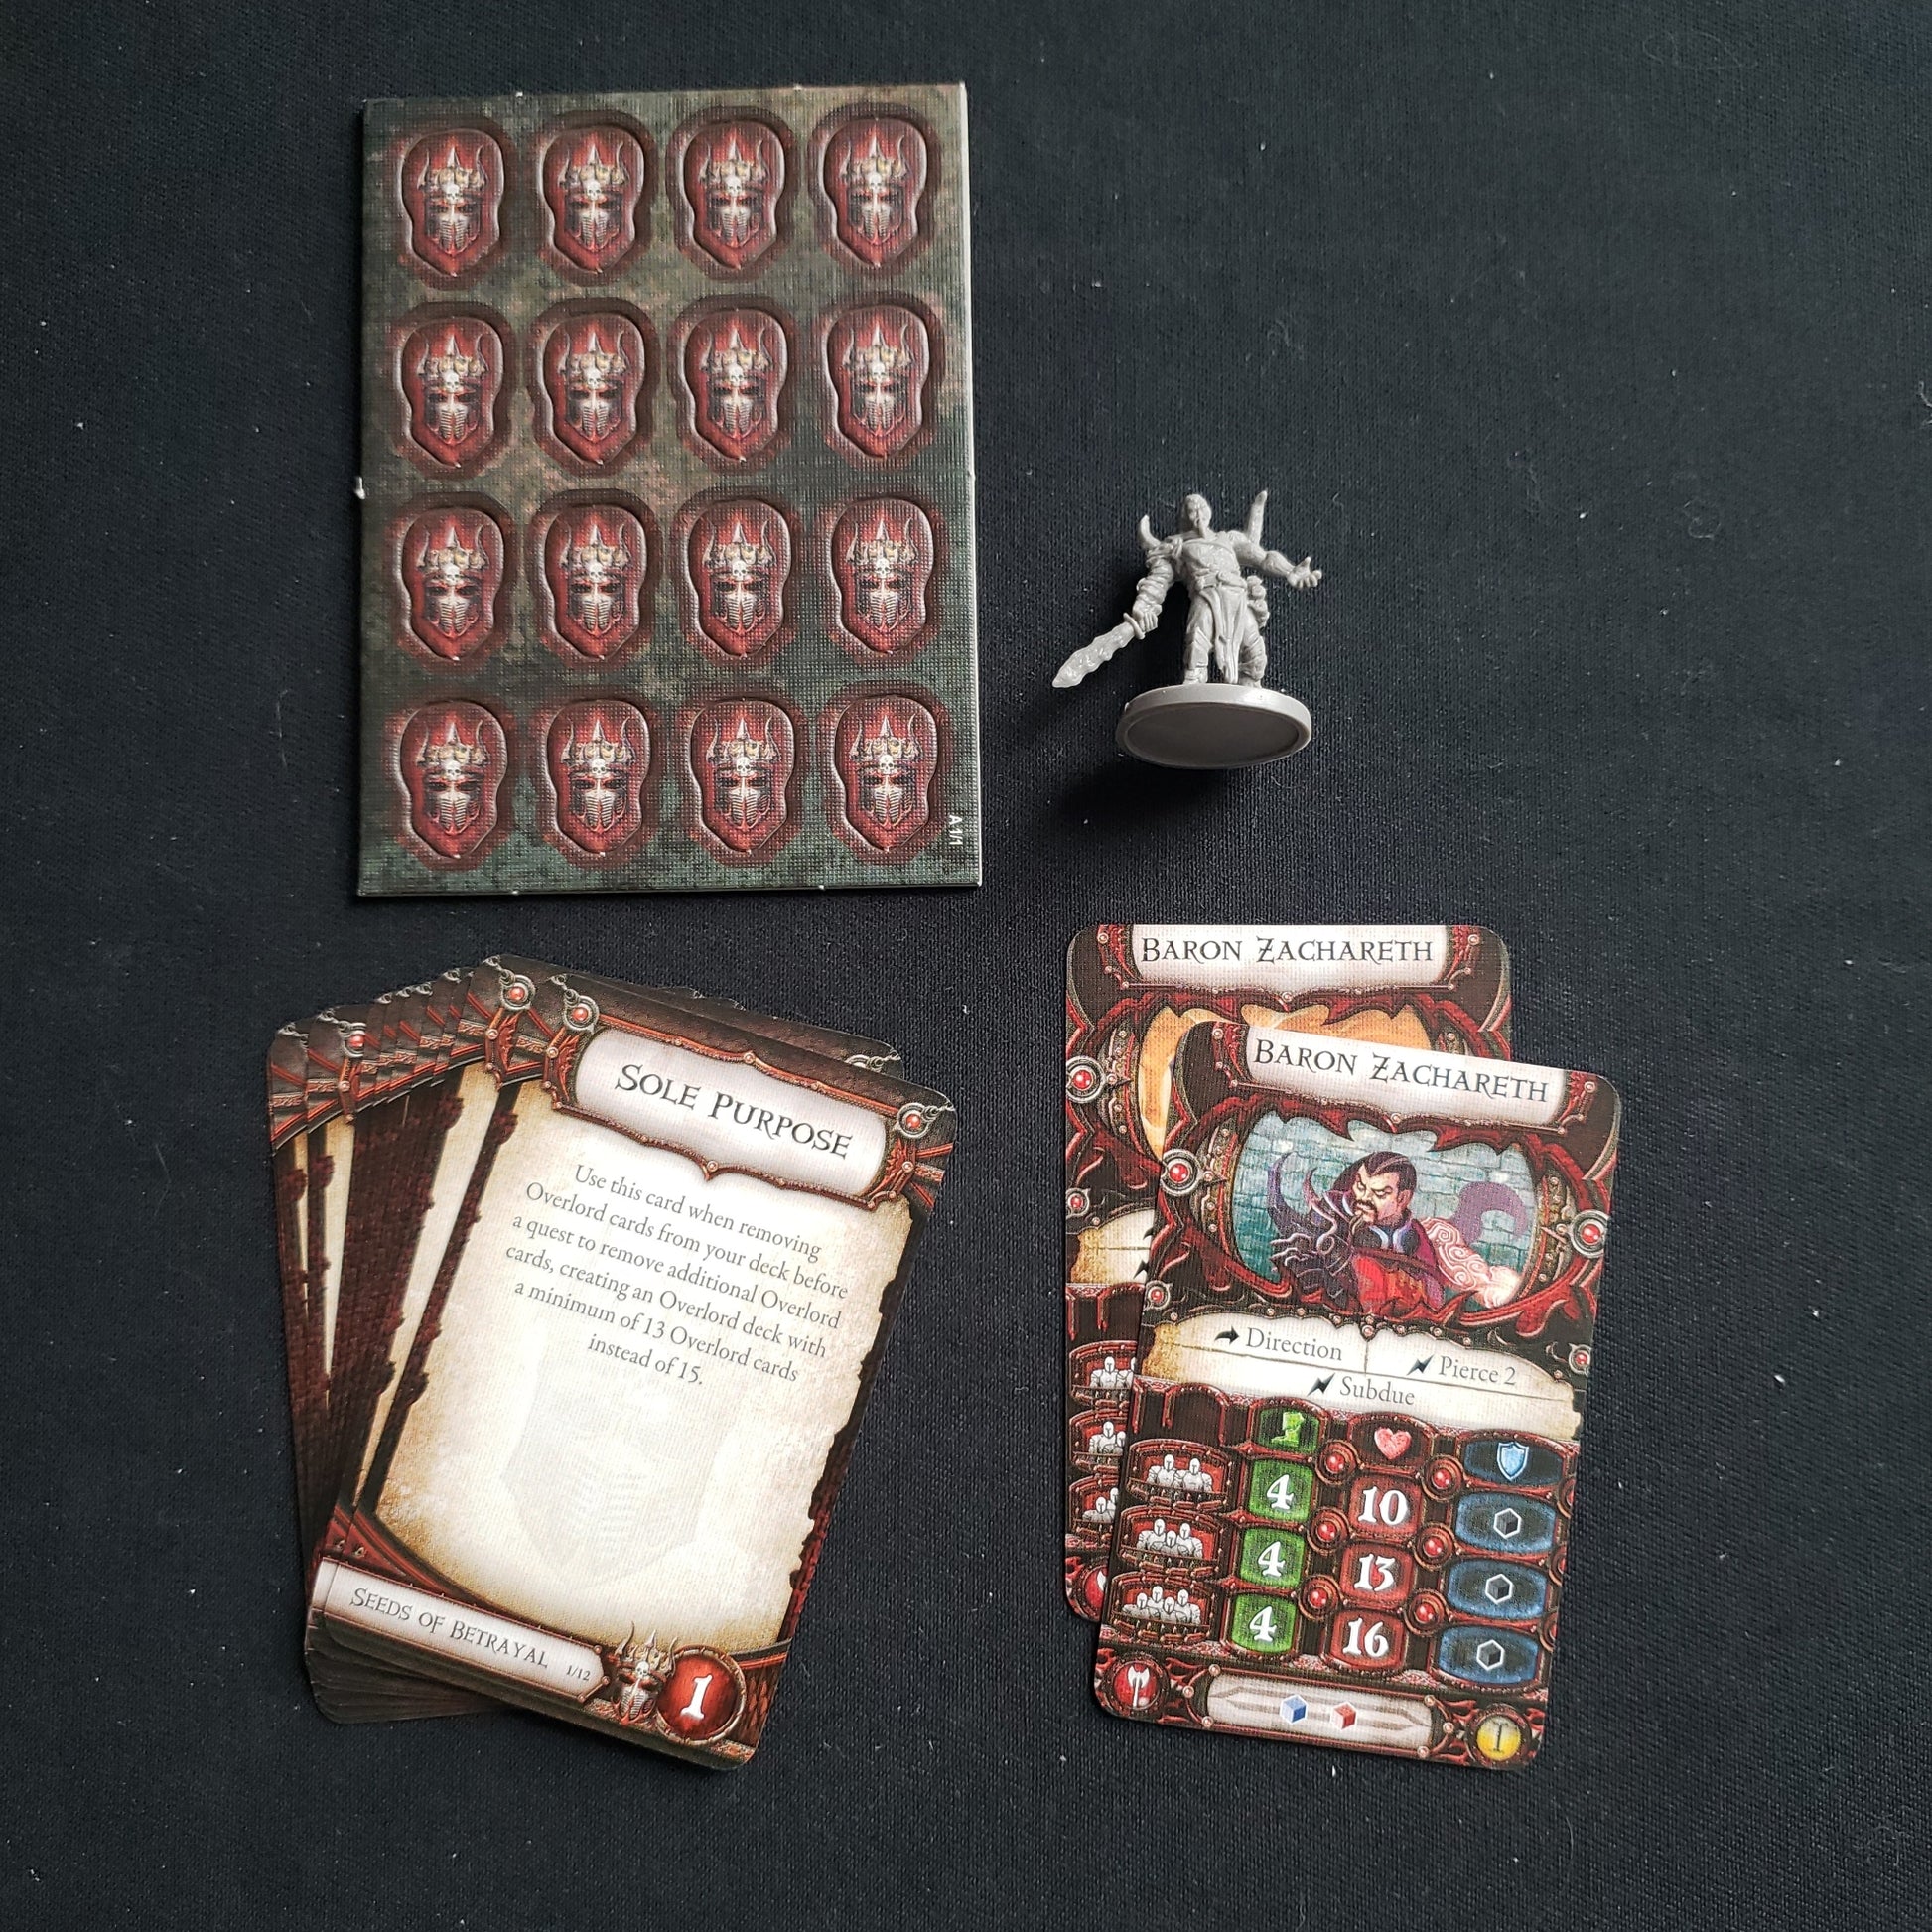 Image shows the components for the Baron Zachareth Lieutenant Pack expansion for the board game Descent: Journeys in the Dark Second Edition